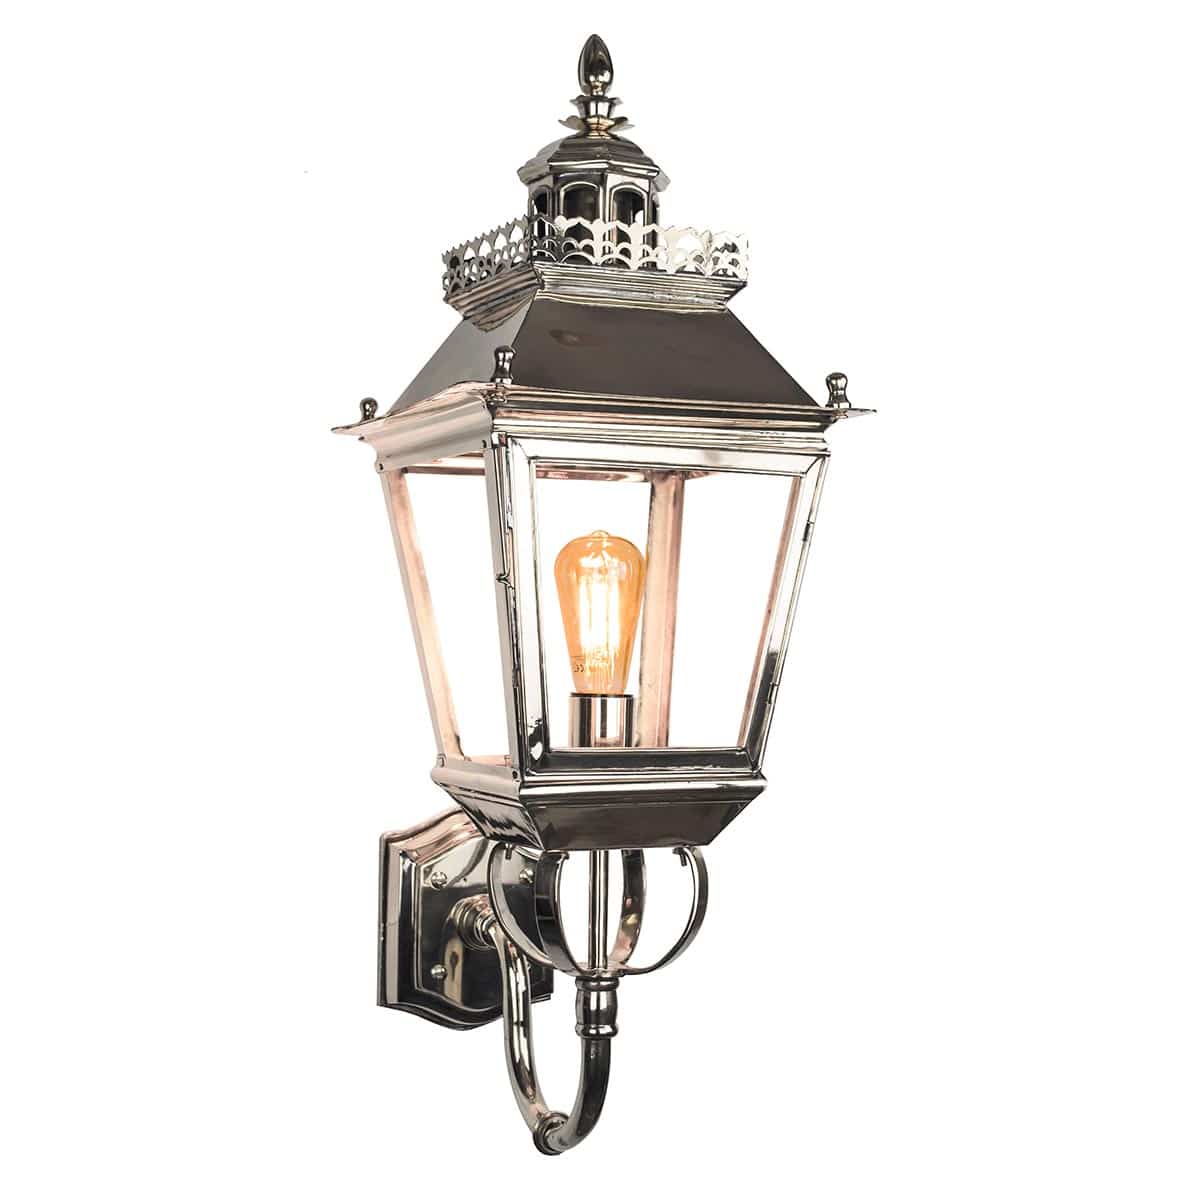 Chateau Small 1 Light Victorian Outdoor Wall Lantern Polished Nickel